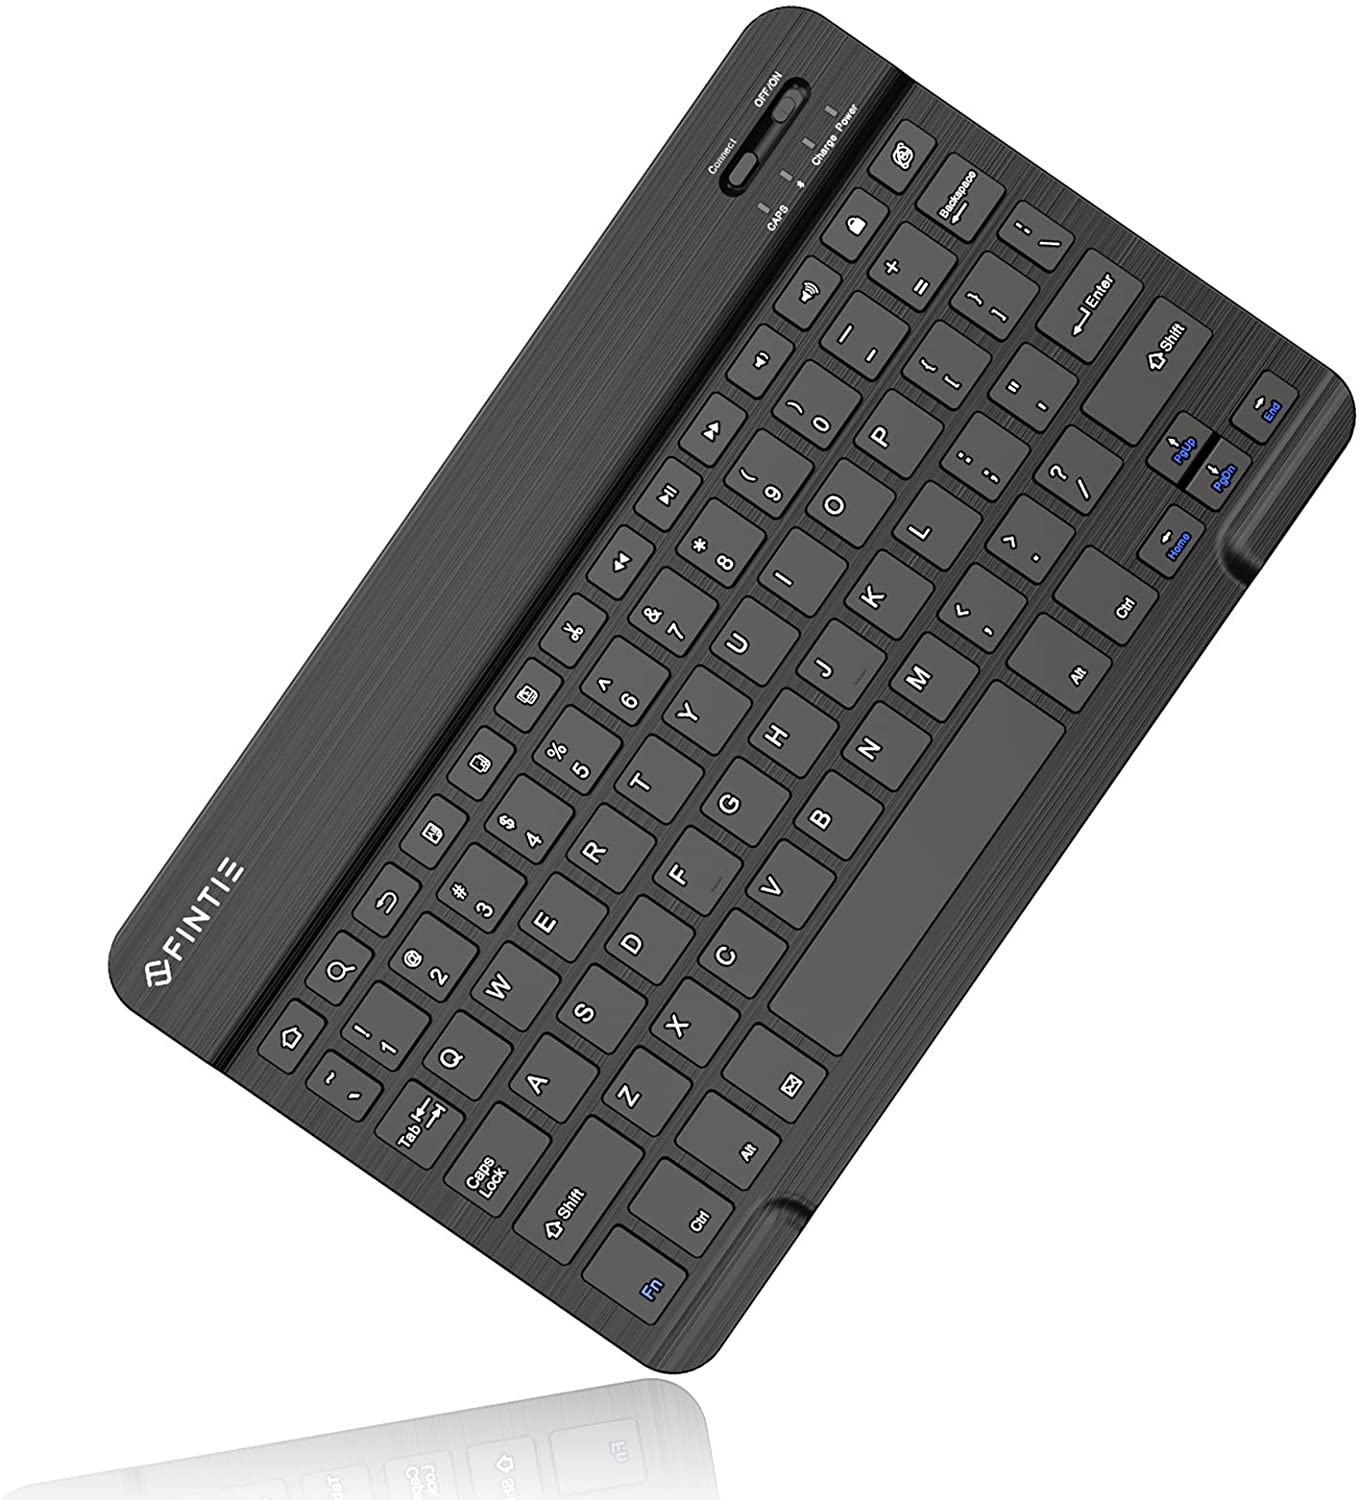 Fintie 10-Inch Ultrathin (4mm) Wireless Bluetooth Keyboard for Android Tablet Samsung Galaxy Tab E/Tab A/Tab S, ASUS, Google Nexus - e4cents